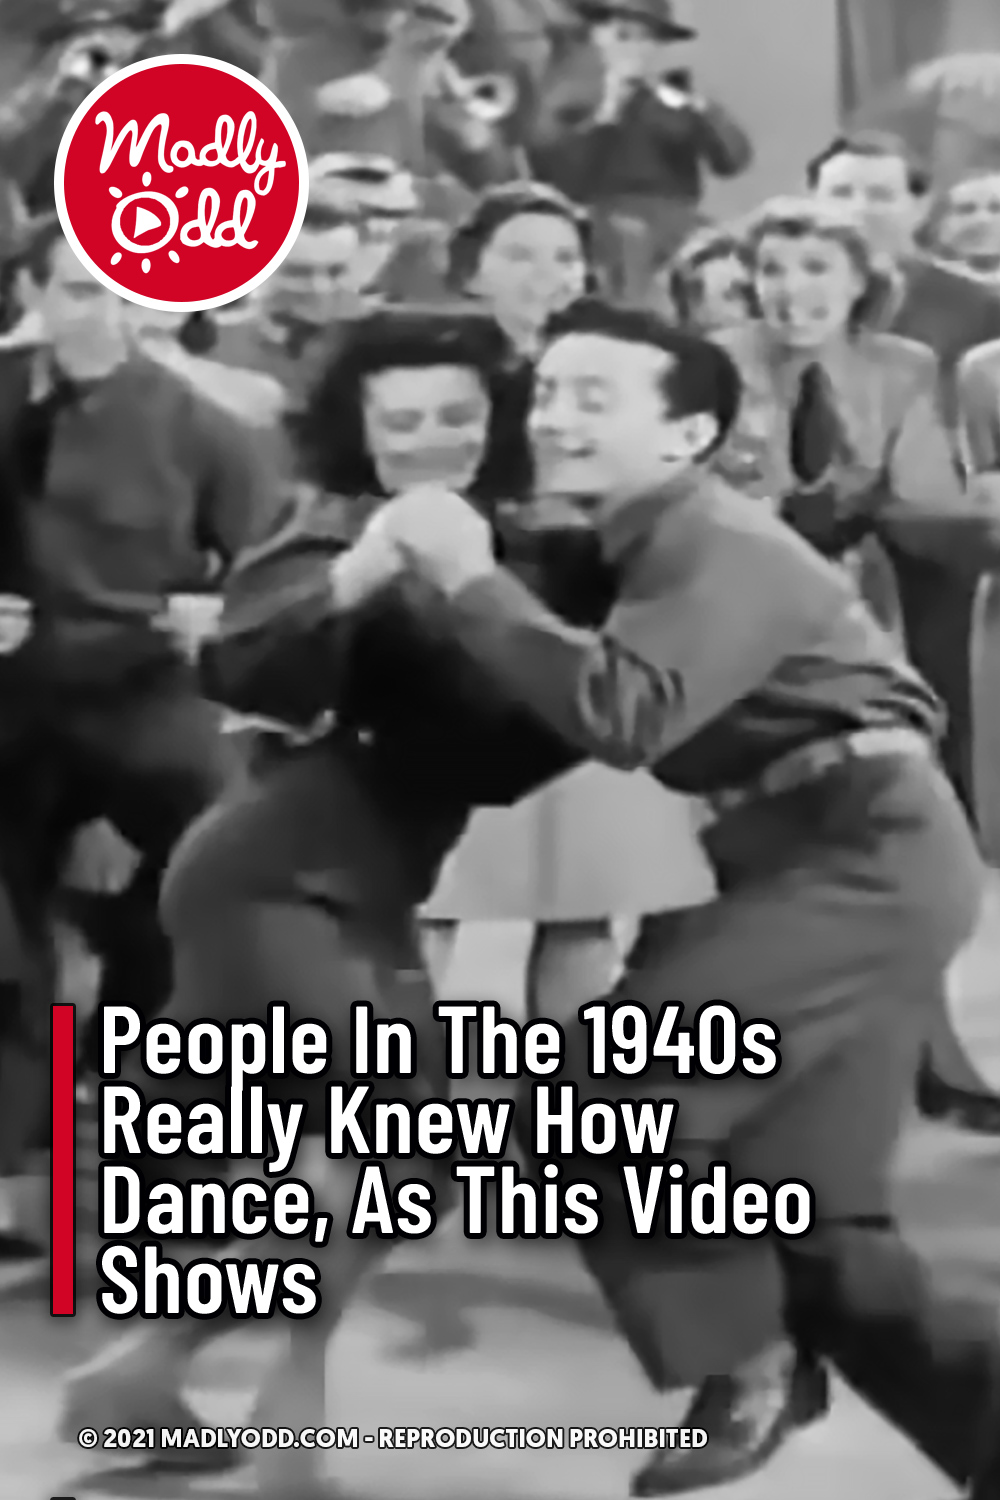 People In The 1940s Really Knew How Dance, As This Video Shows